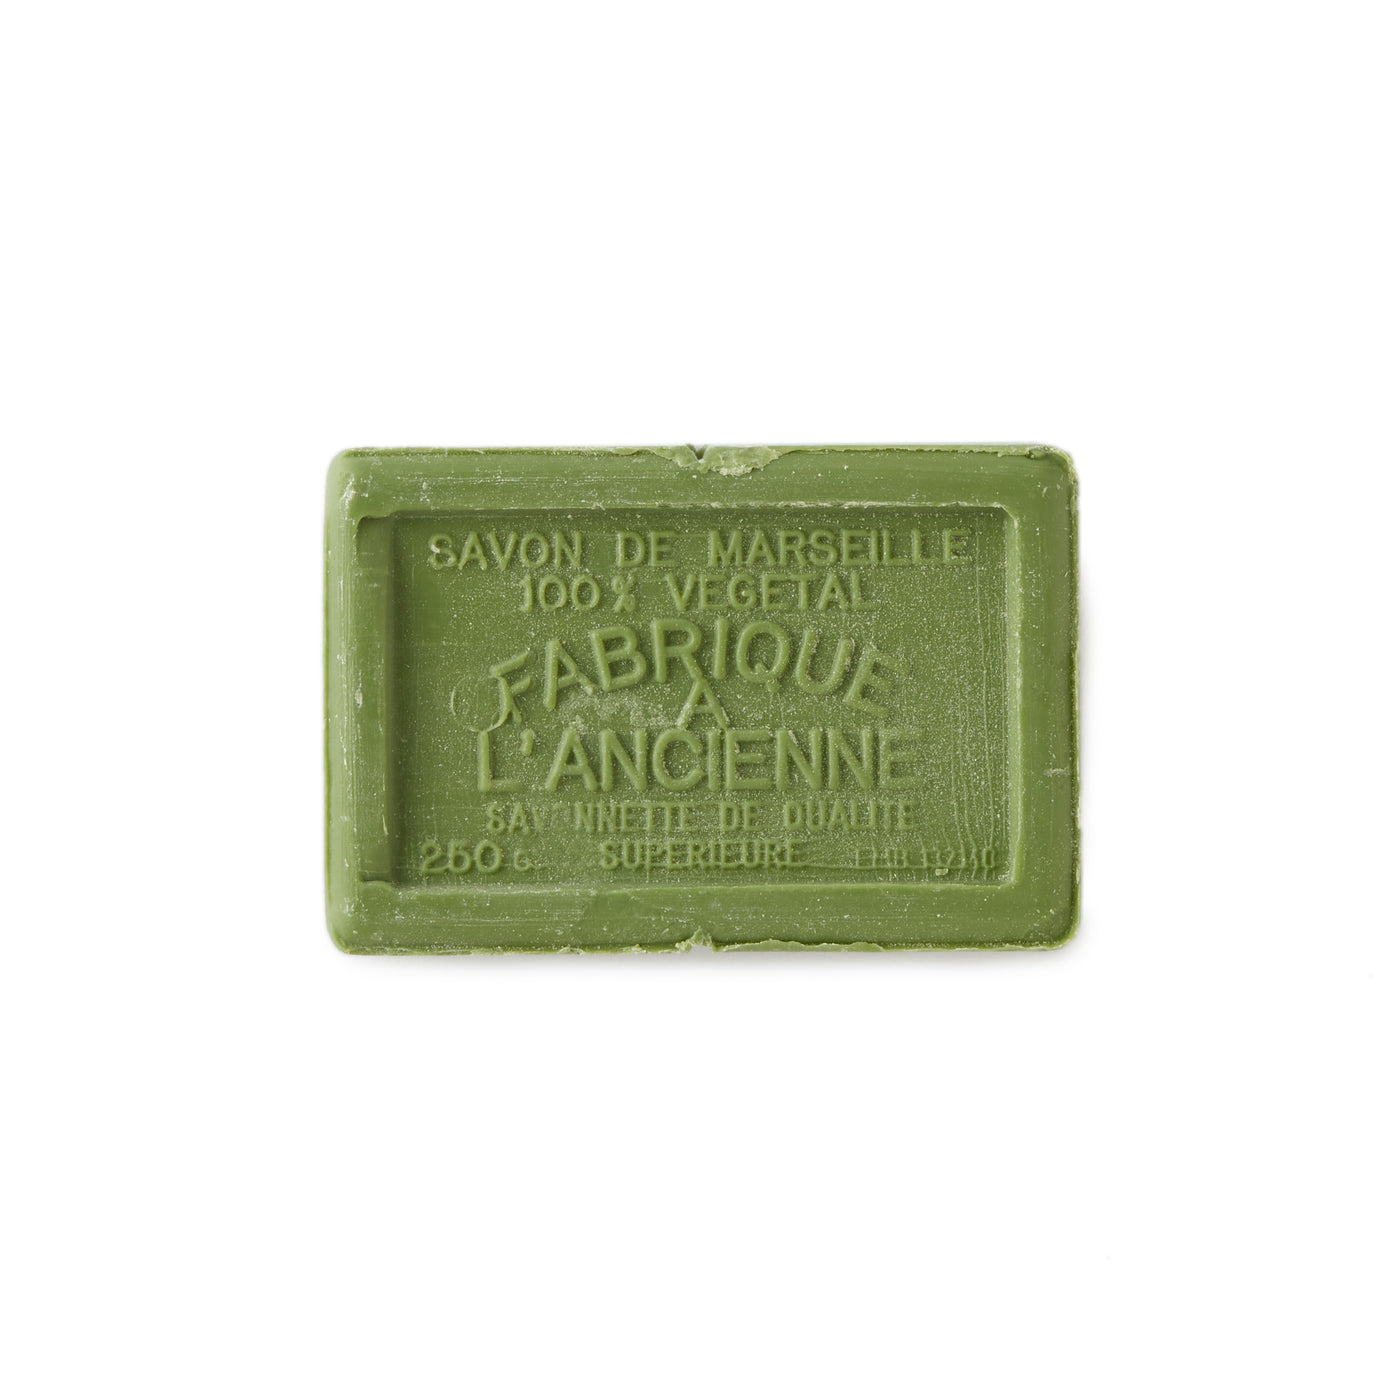 Nostalgie Soap Boxes with Olive Oil Soap: Bicycle